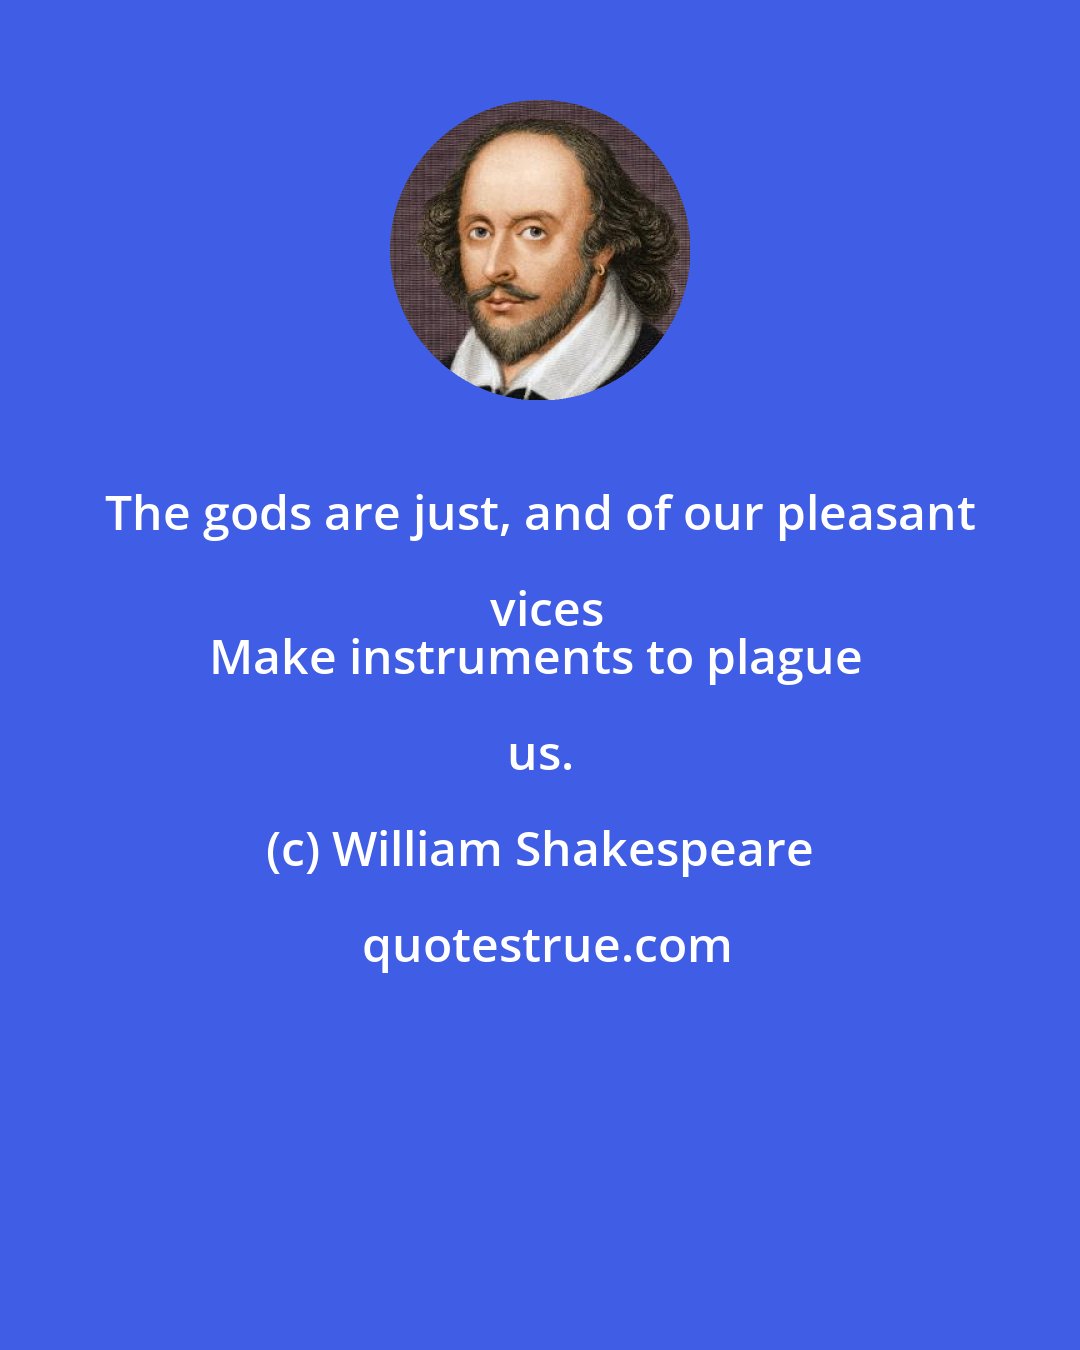 William Shakespeare: The gods are just, and of our pleasant vices
Make instruments to plague us.